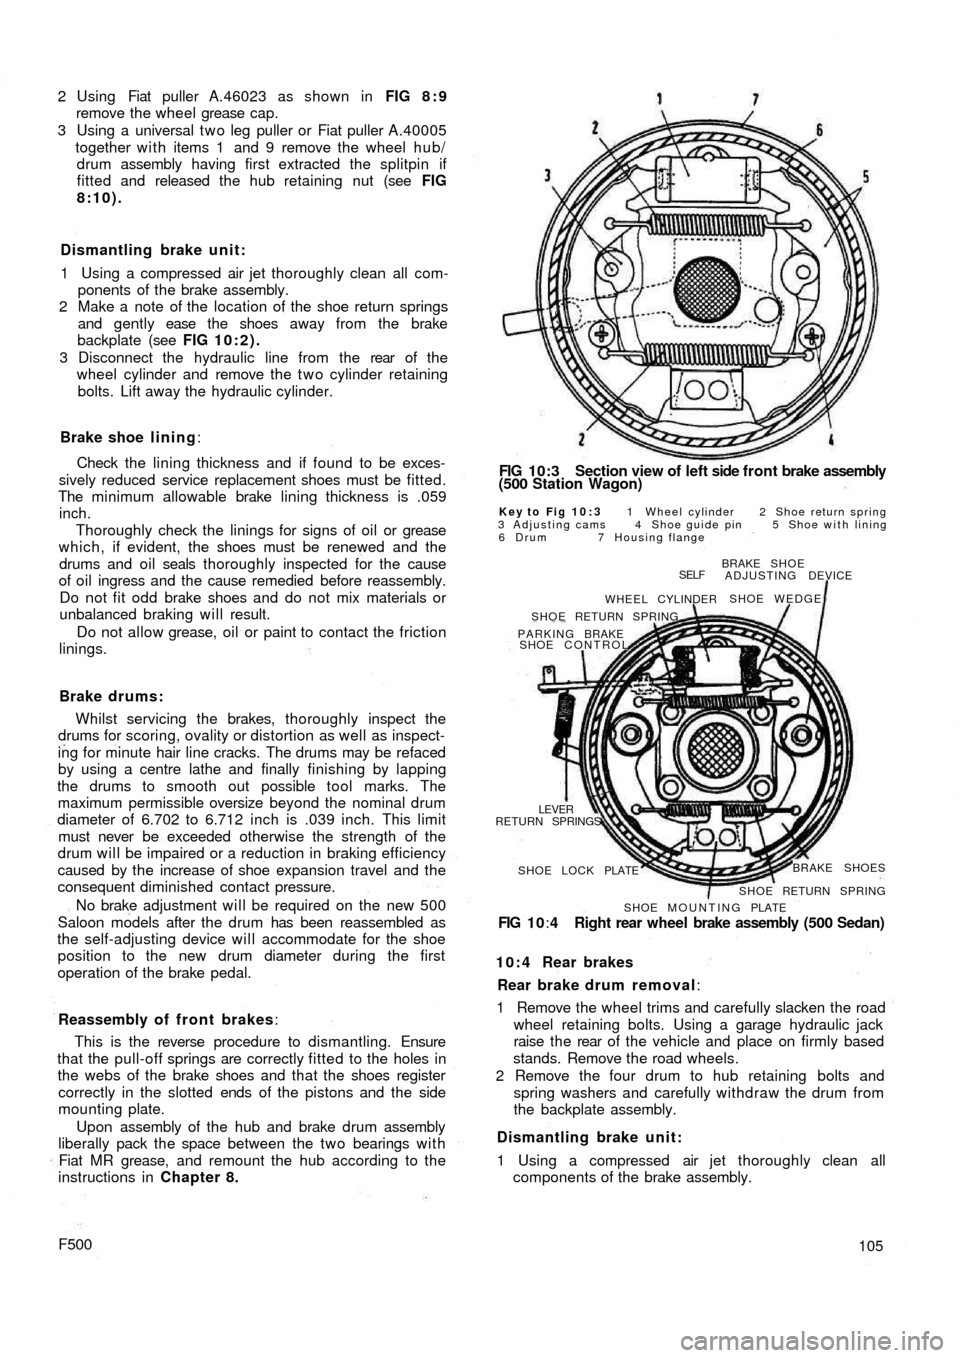 FIAT 500 1970 1.G Owners Manual 2 Using  Fiat puller A.46023 as shown in FIG 8 : 9
remove the wheel grease cap.
3 Using a universal t w o leg puller or Fiat puller A.40005
together w i t h items 1  and 9 remove the wheel hub/
drum a